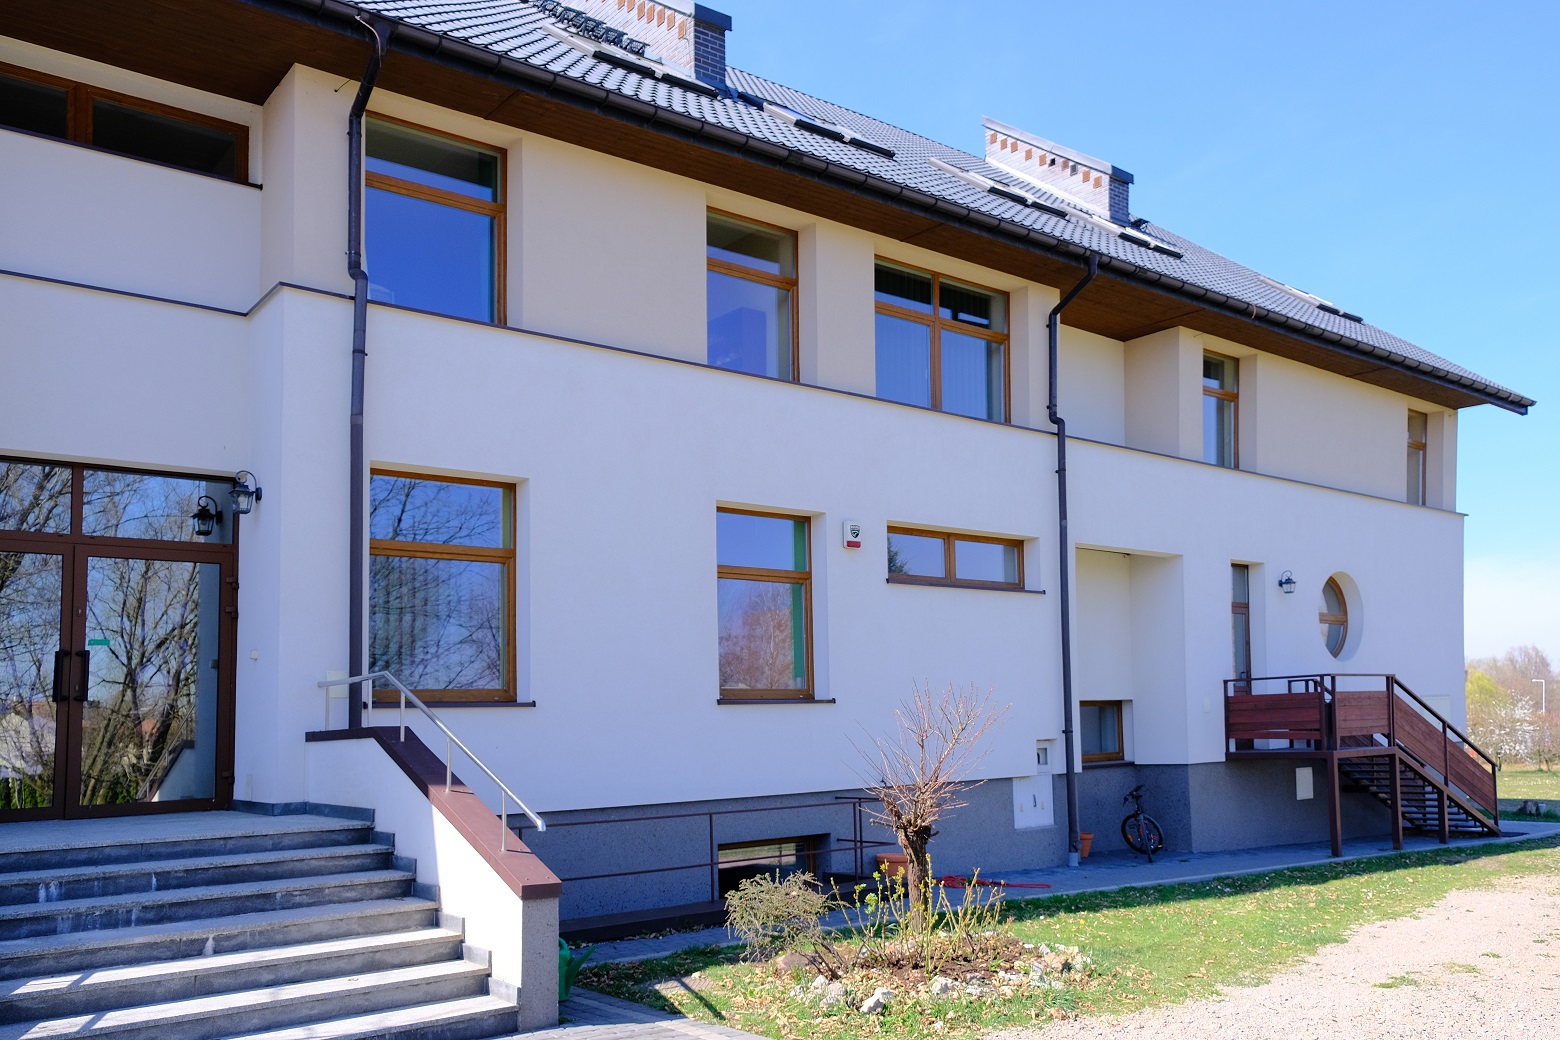 The Comboni House in Krakow is a large white building with plenty of space to house refugees